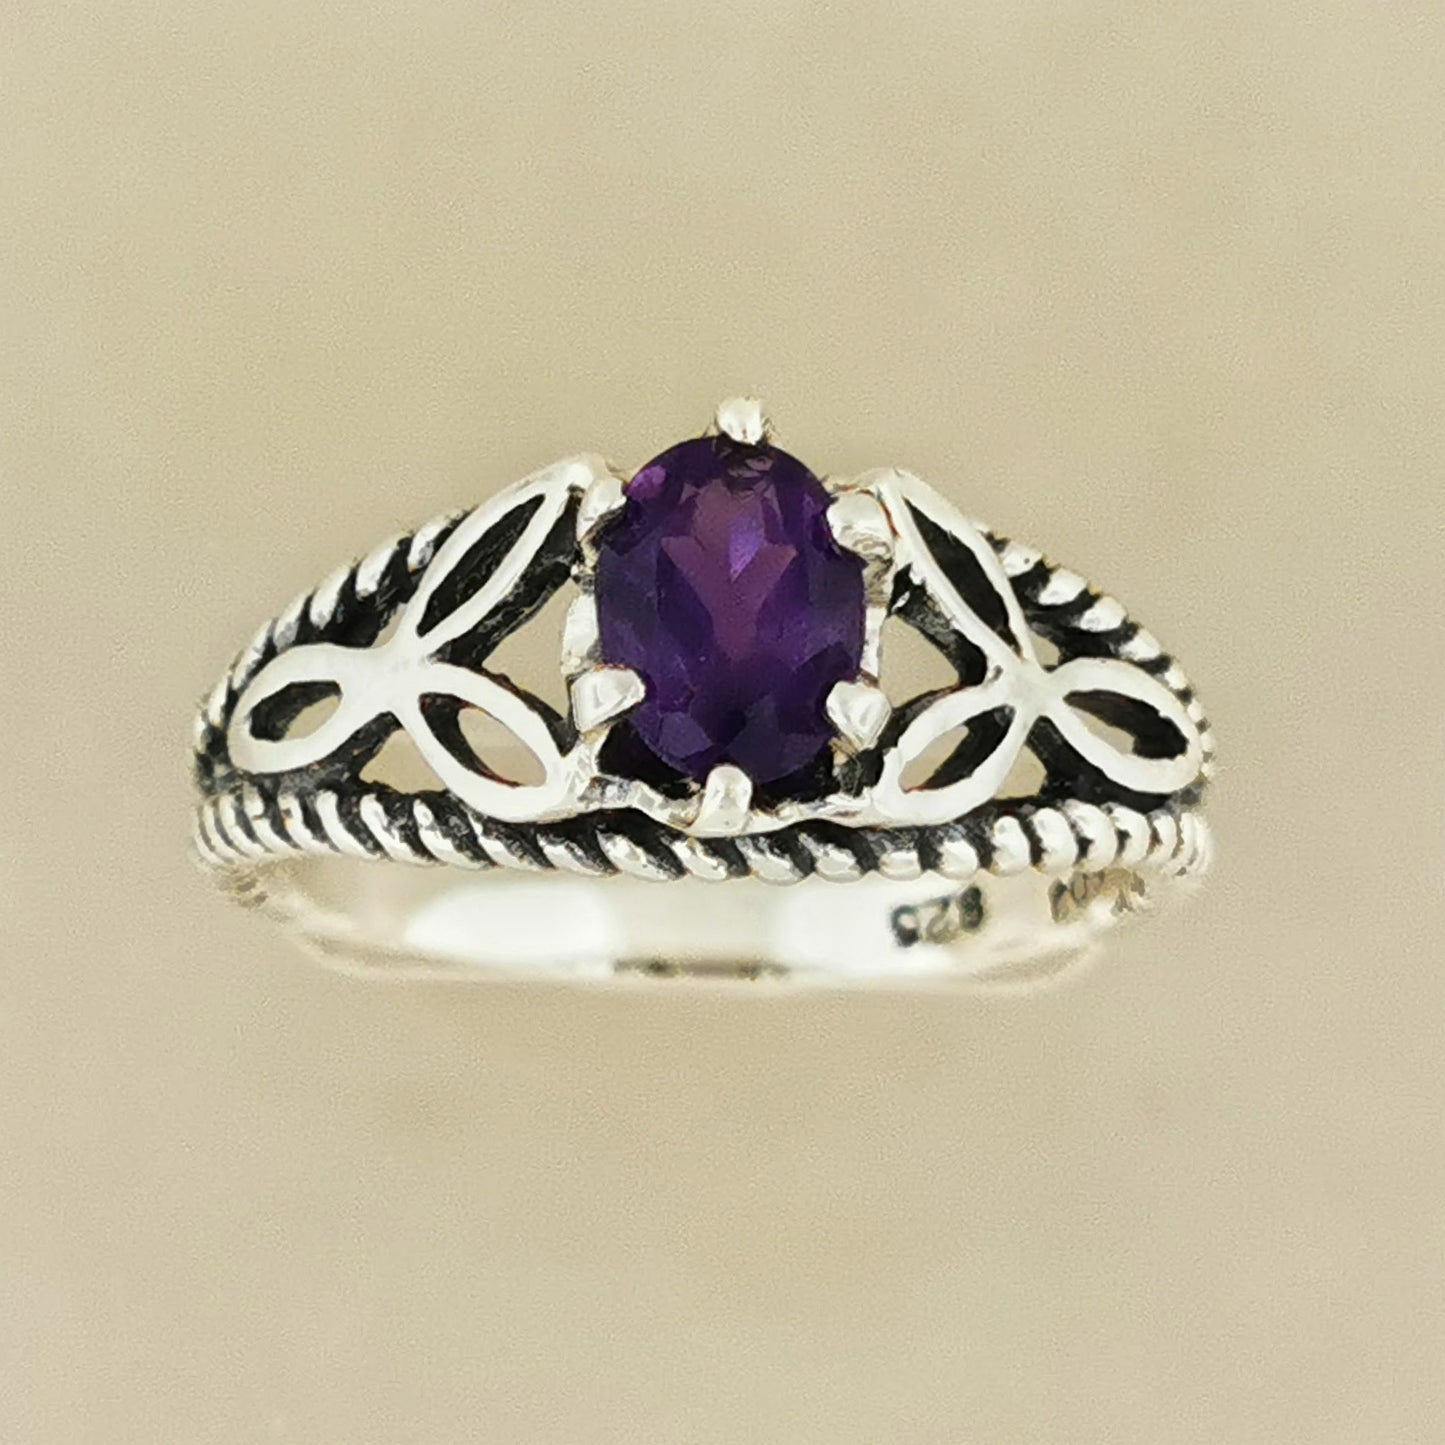 Celtic Triquetra Knotwork Gemstone Ring in Sterling Silver